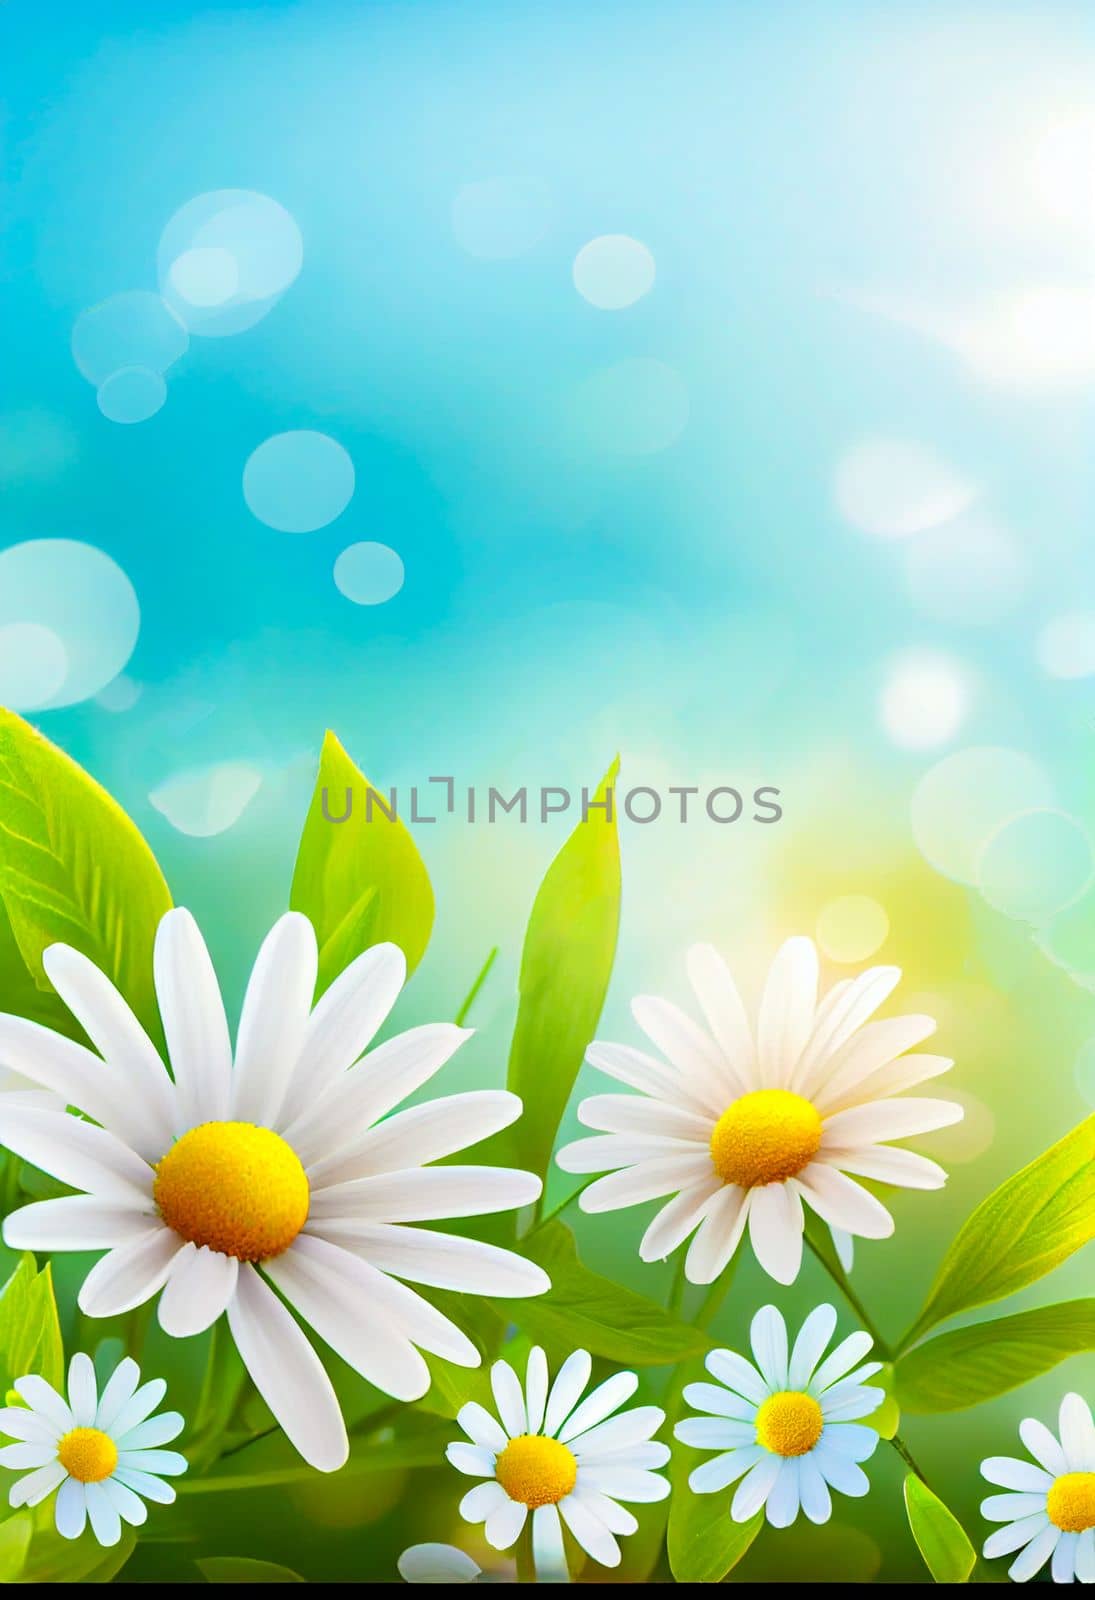 Sunny day background with daisies and leaves, copy space for your text